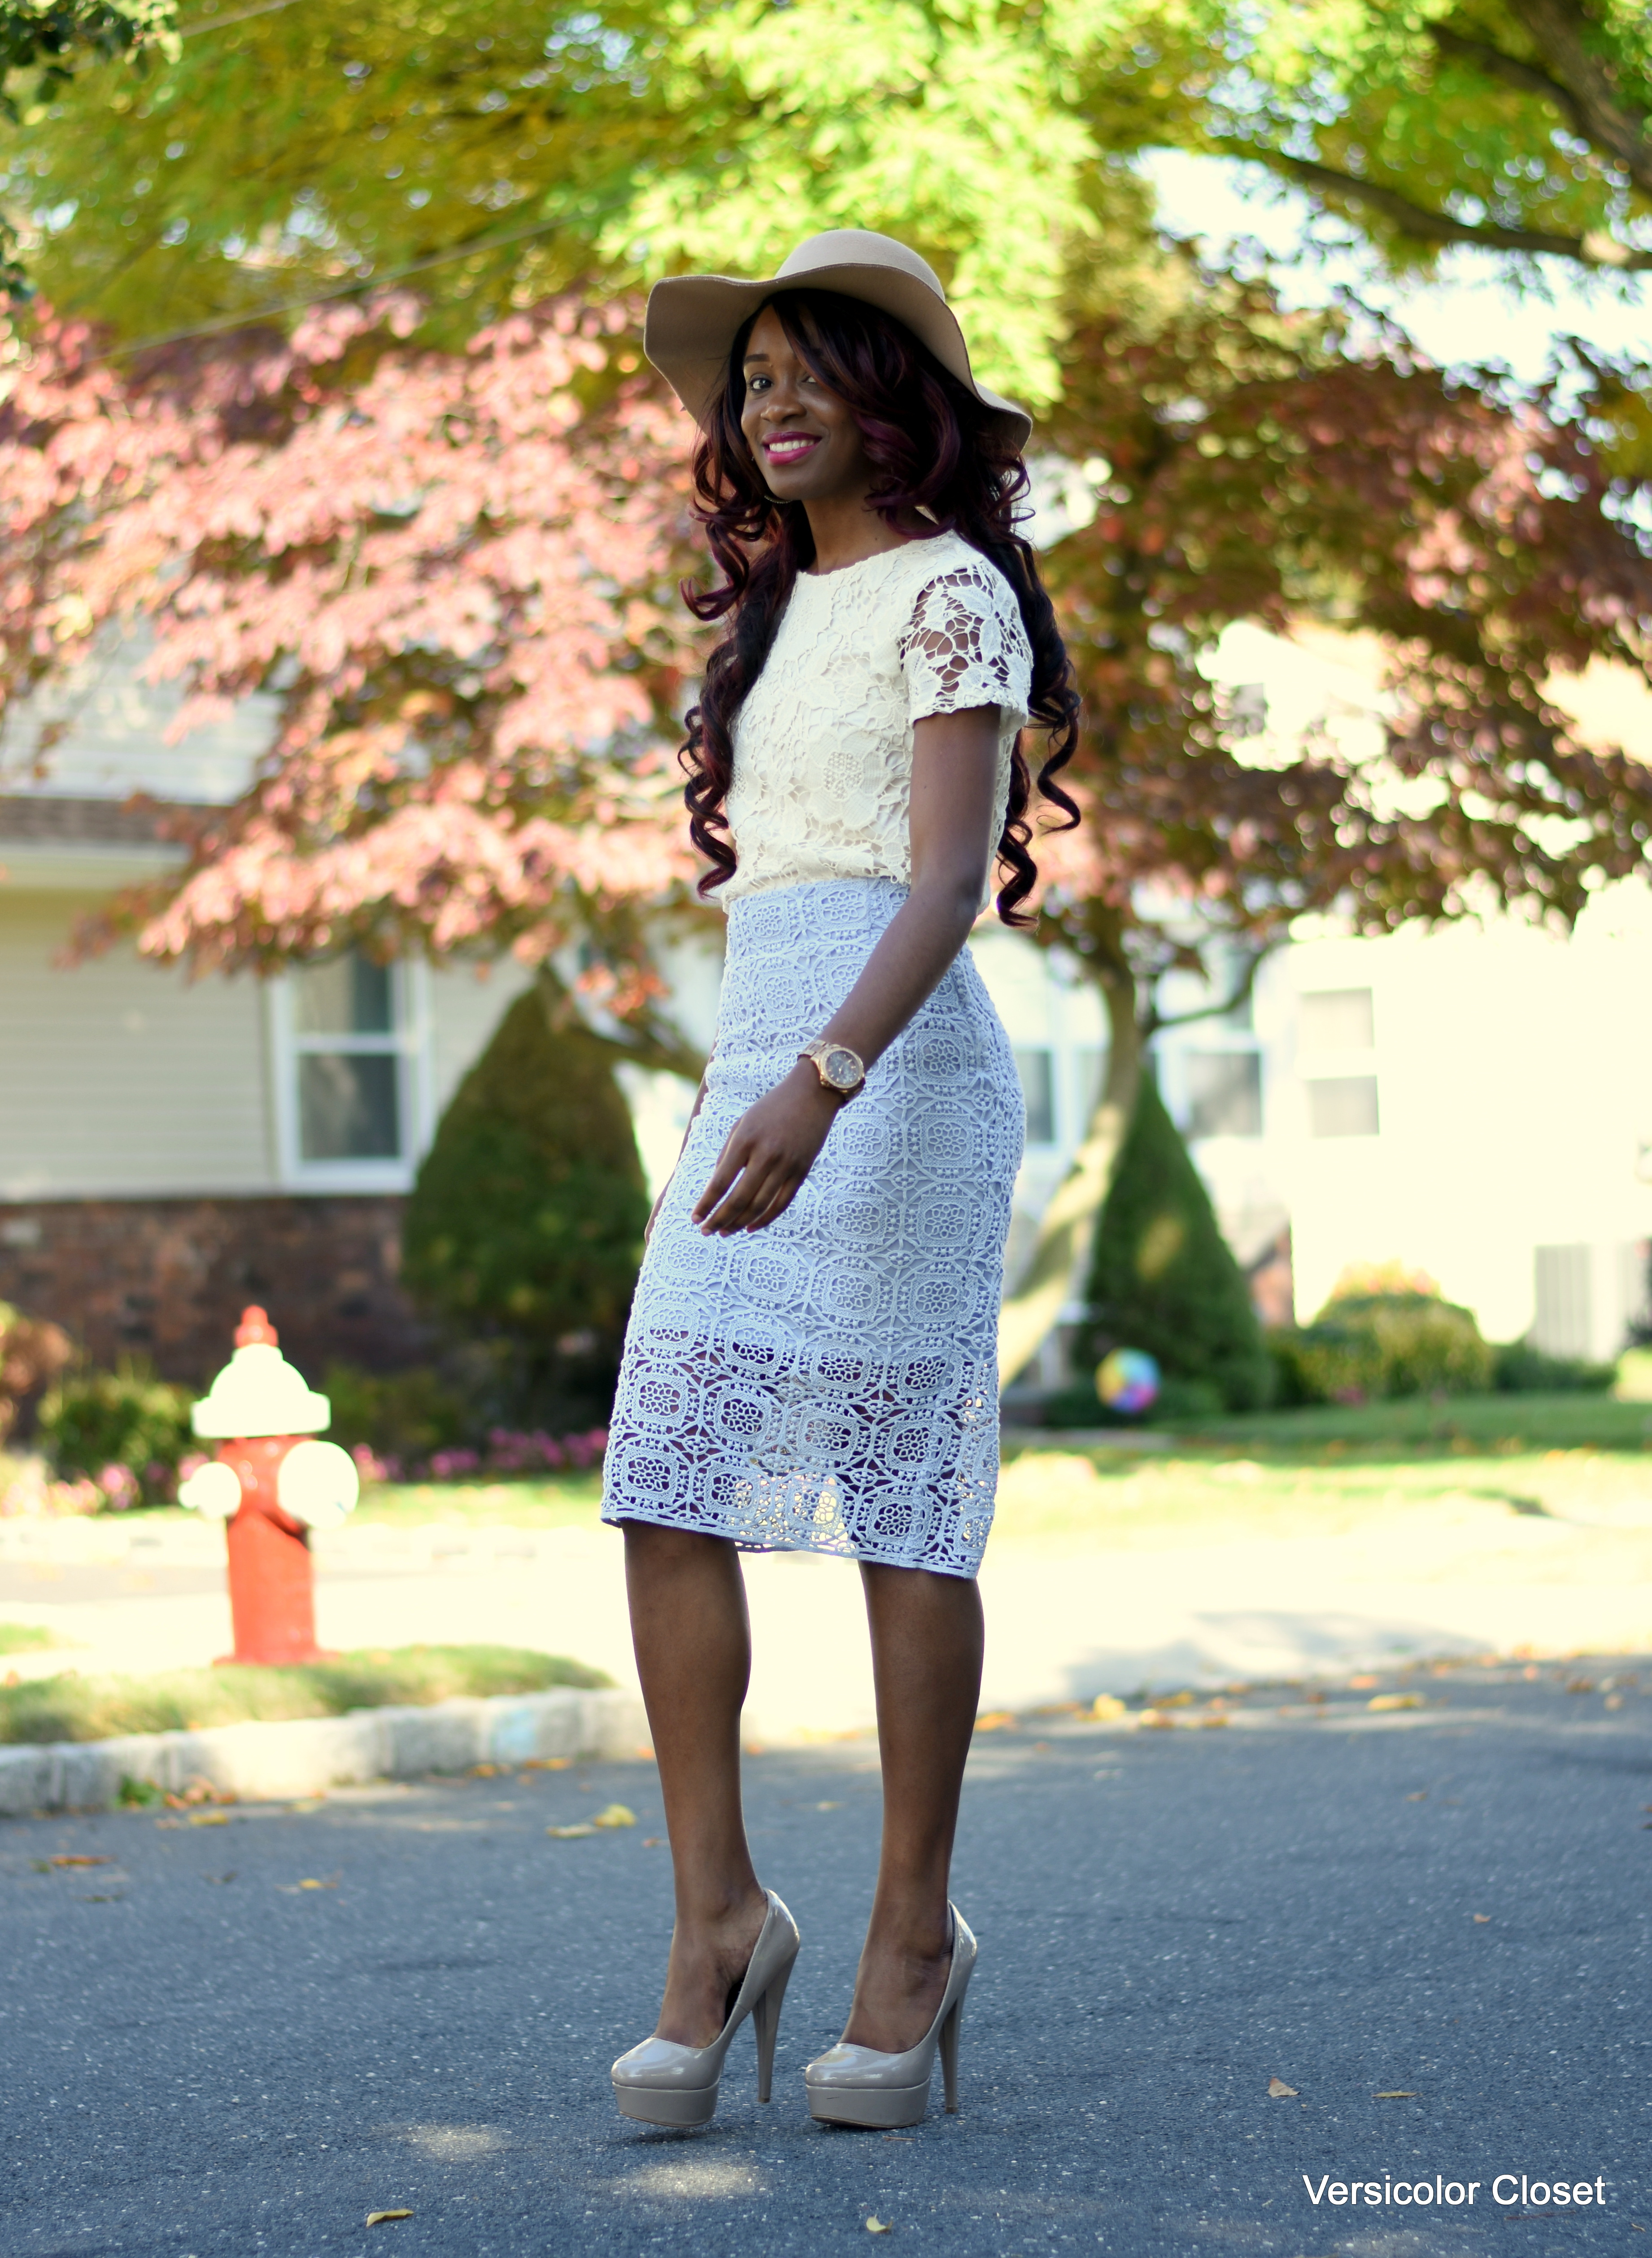 “Lace skirt & top”